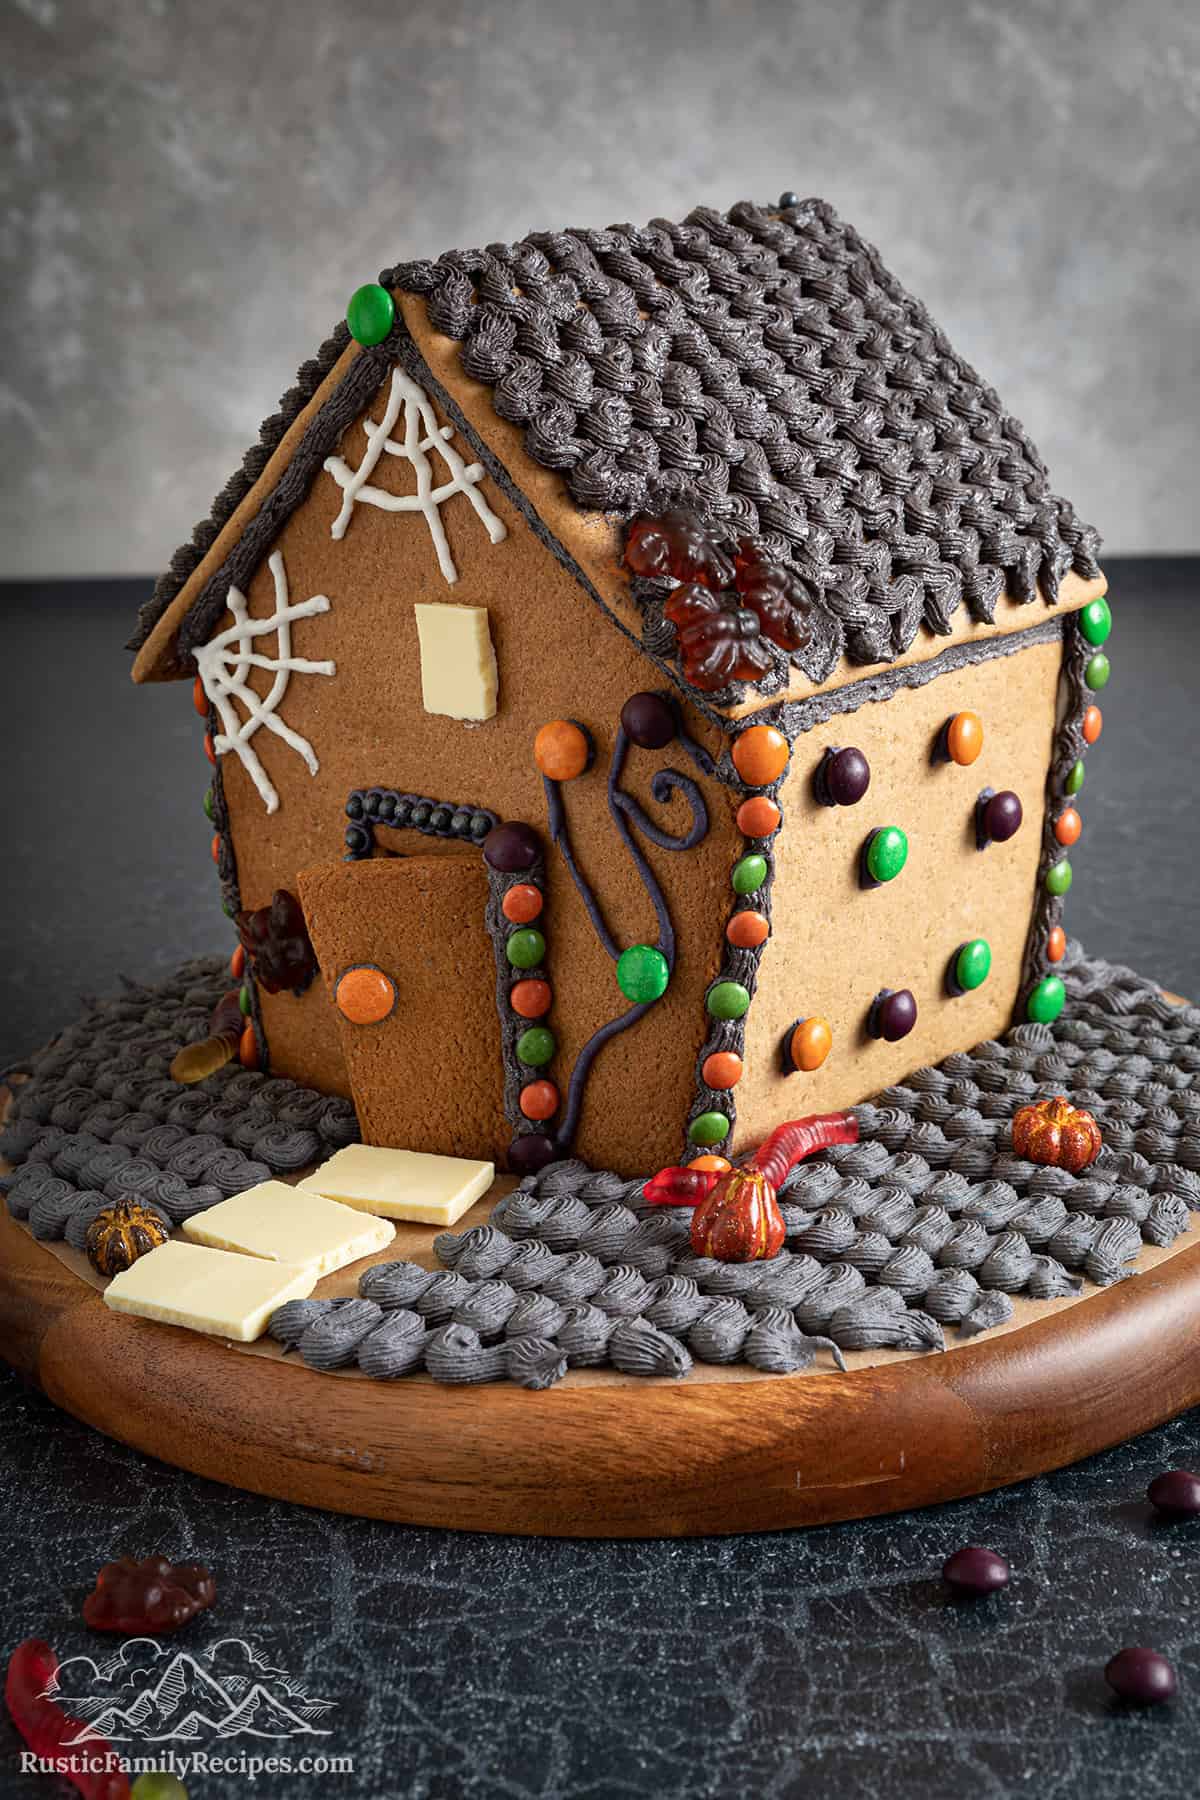 Decorated Halloween gingerbread house.